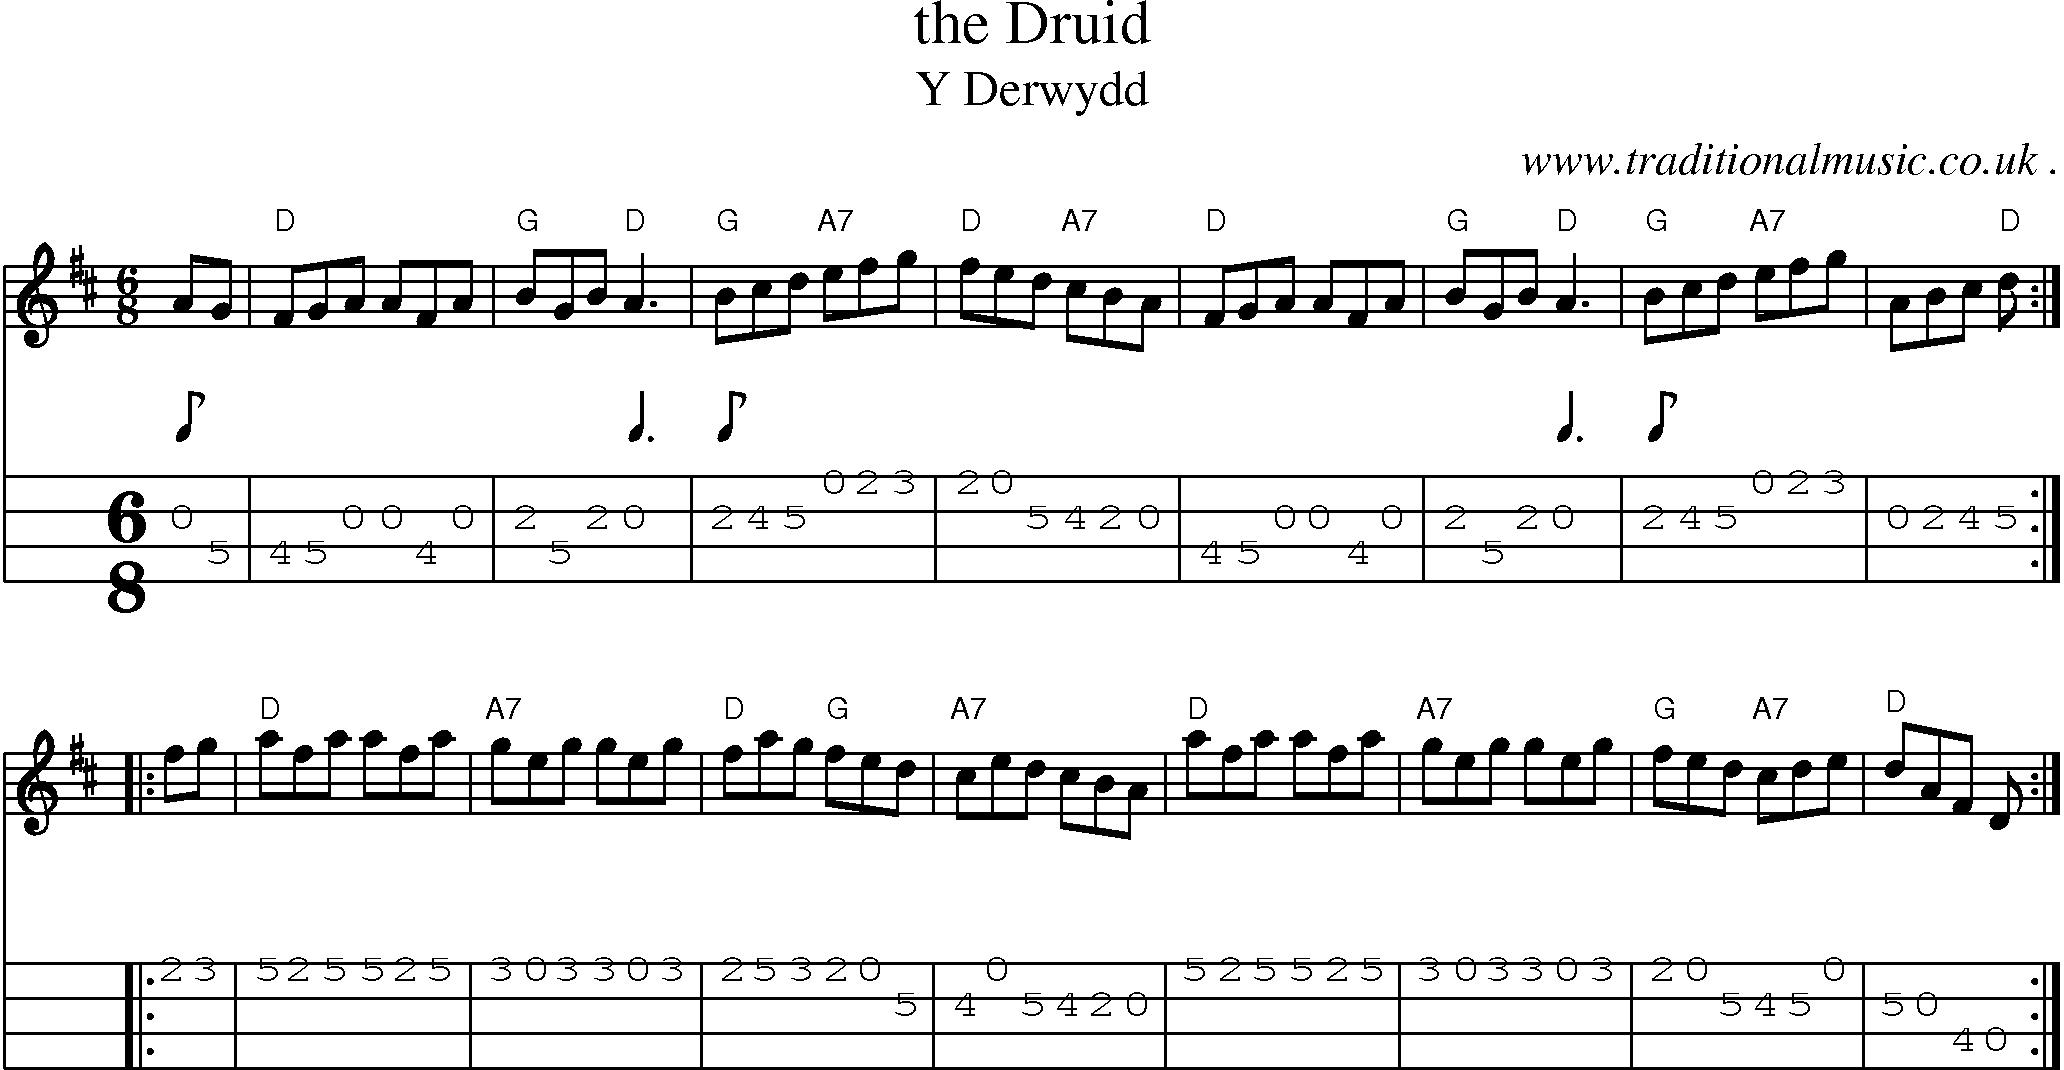 Sheet-music  score, Chords and Mandolin Tabs for The Druid